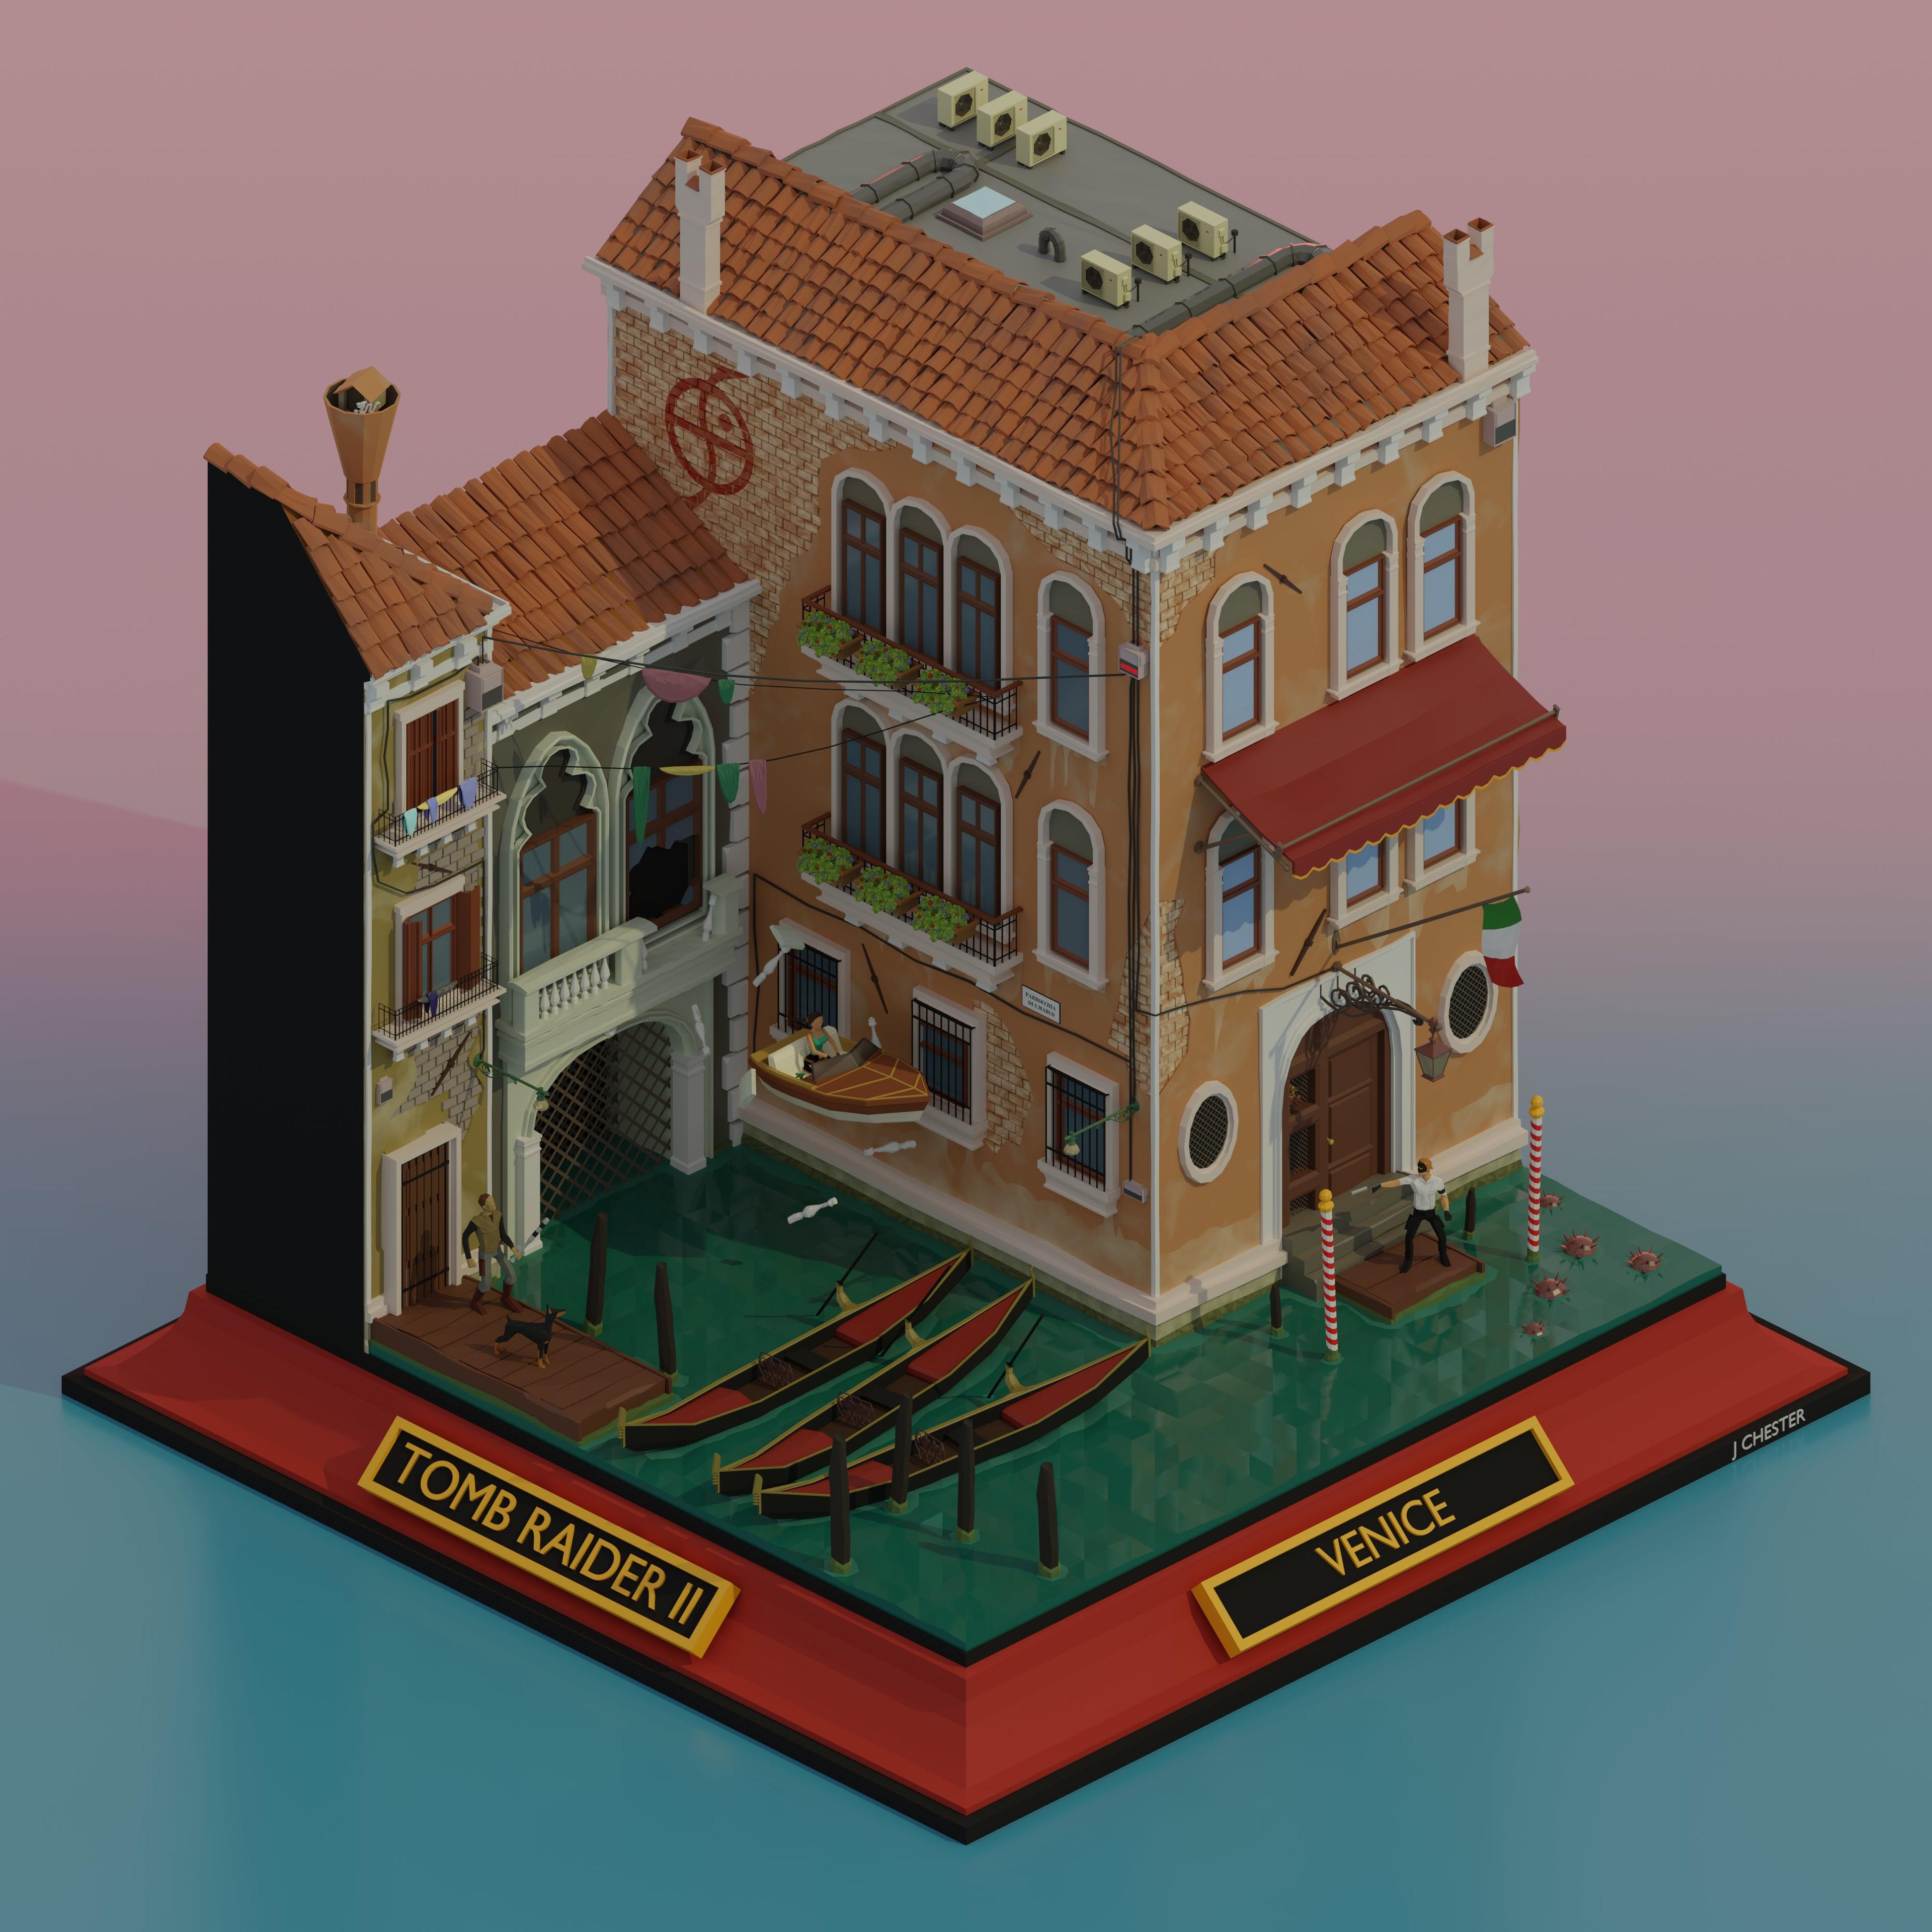 ‘Reimagined Low Poly diorama’ level series by Jason Chester - TR2 - Venice